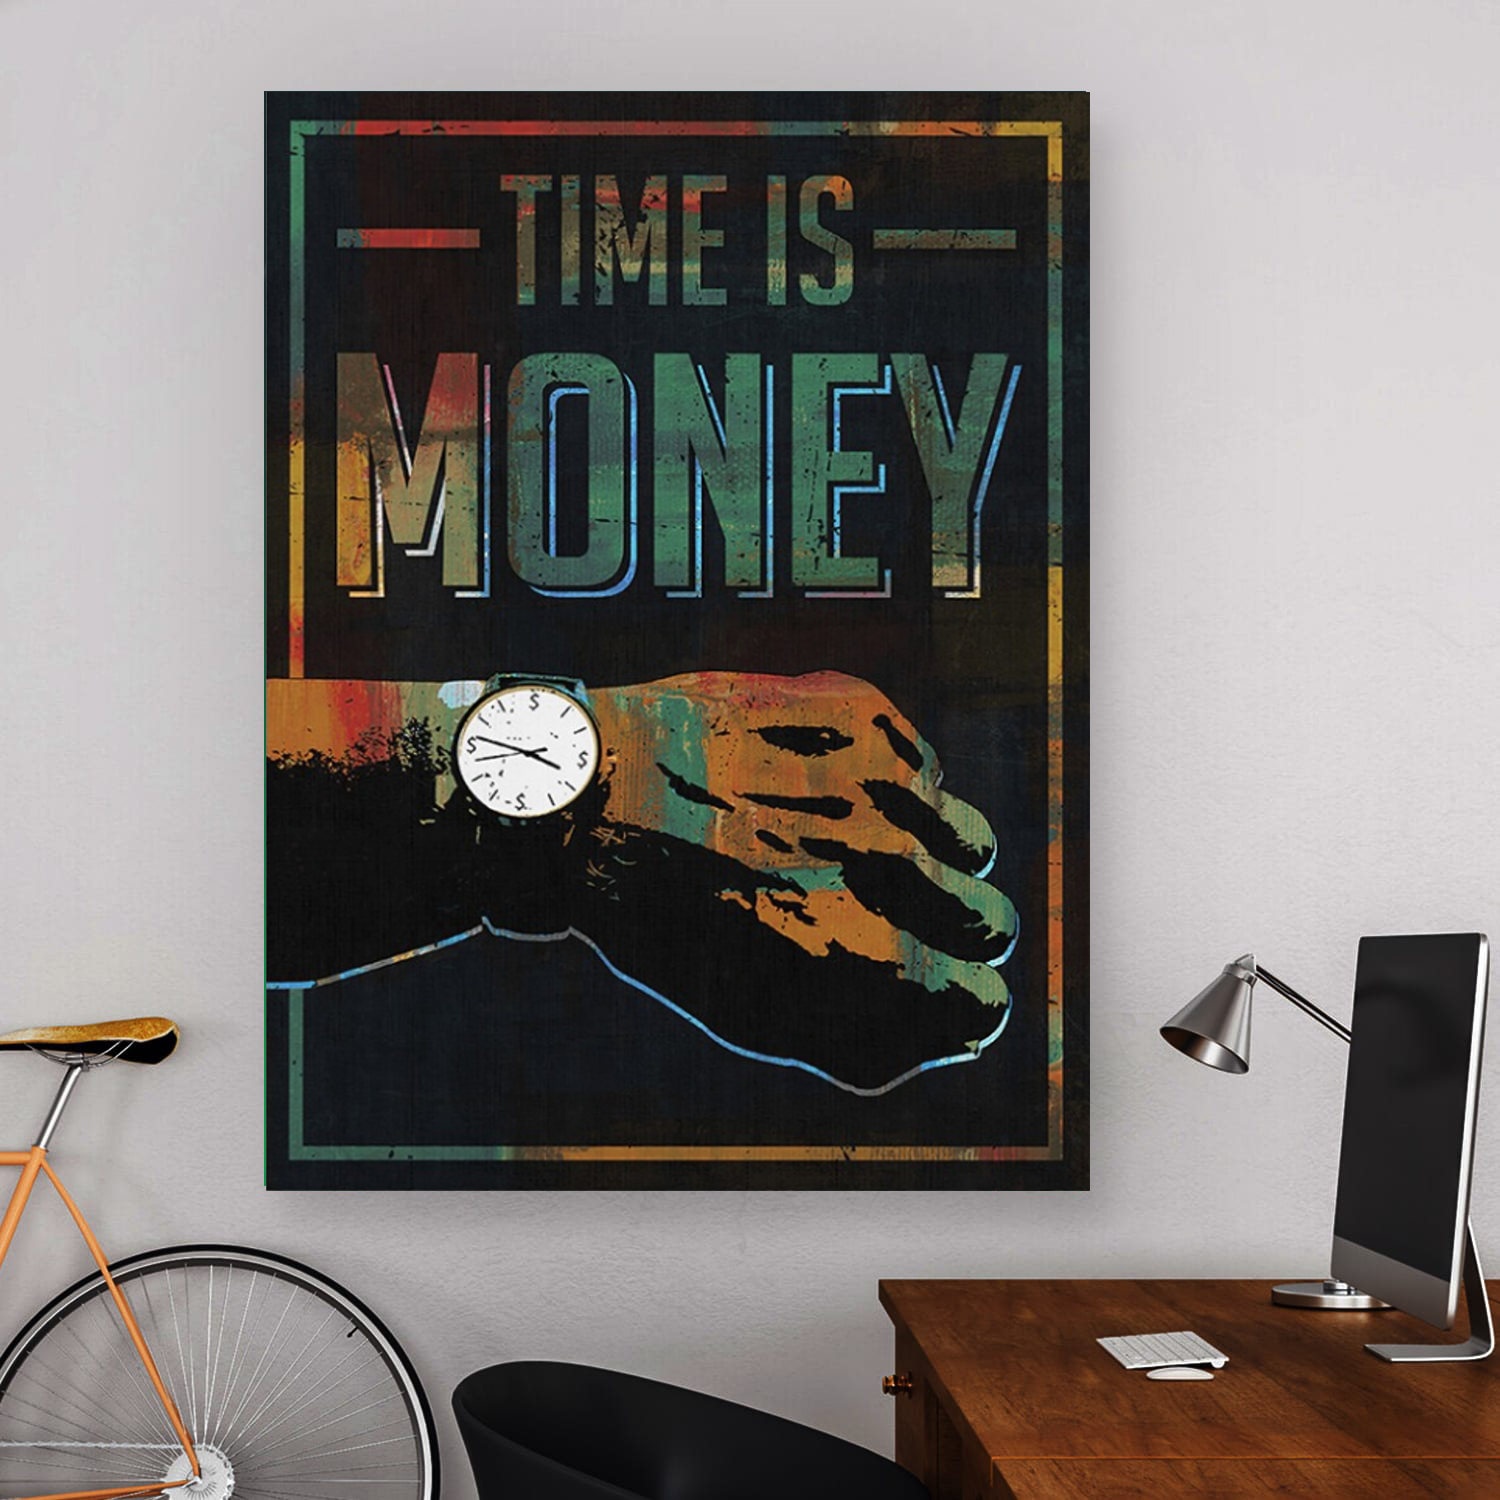 Your Time is Money